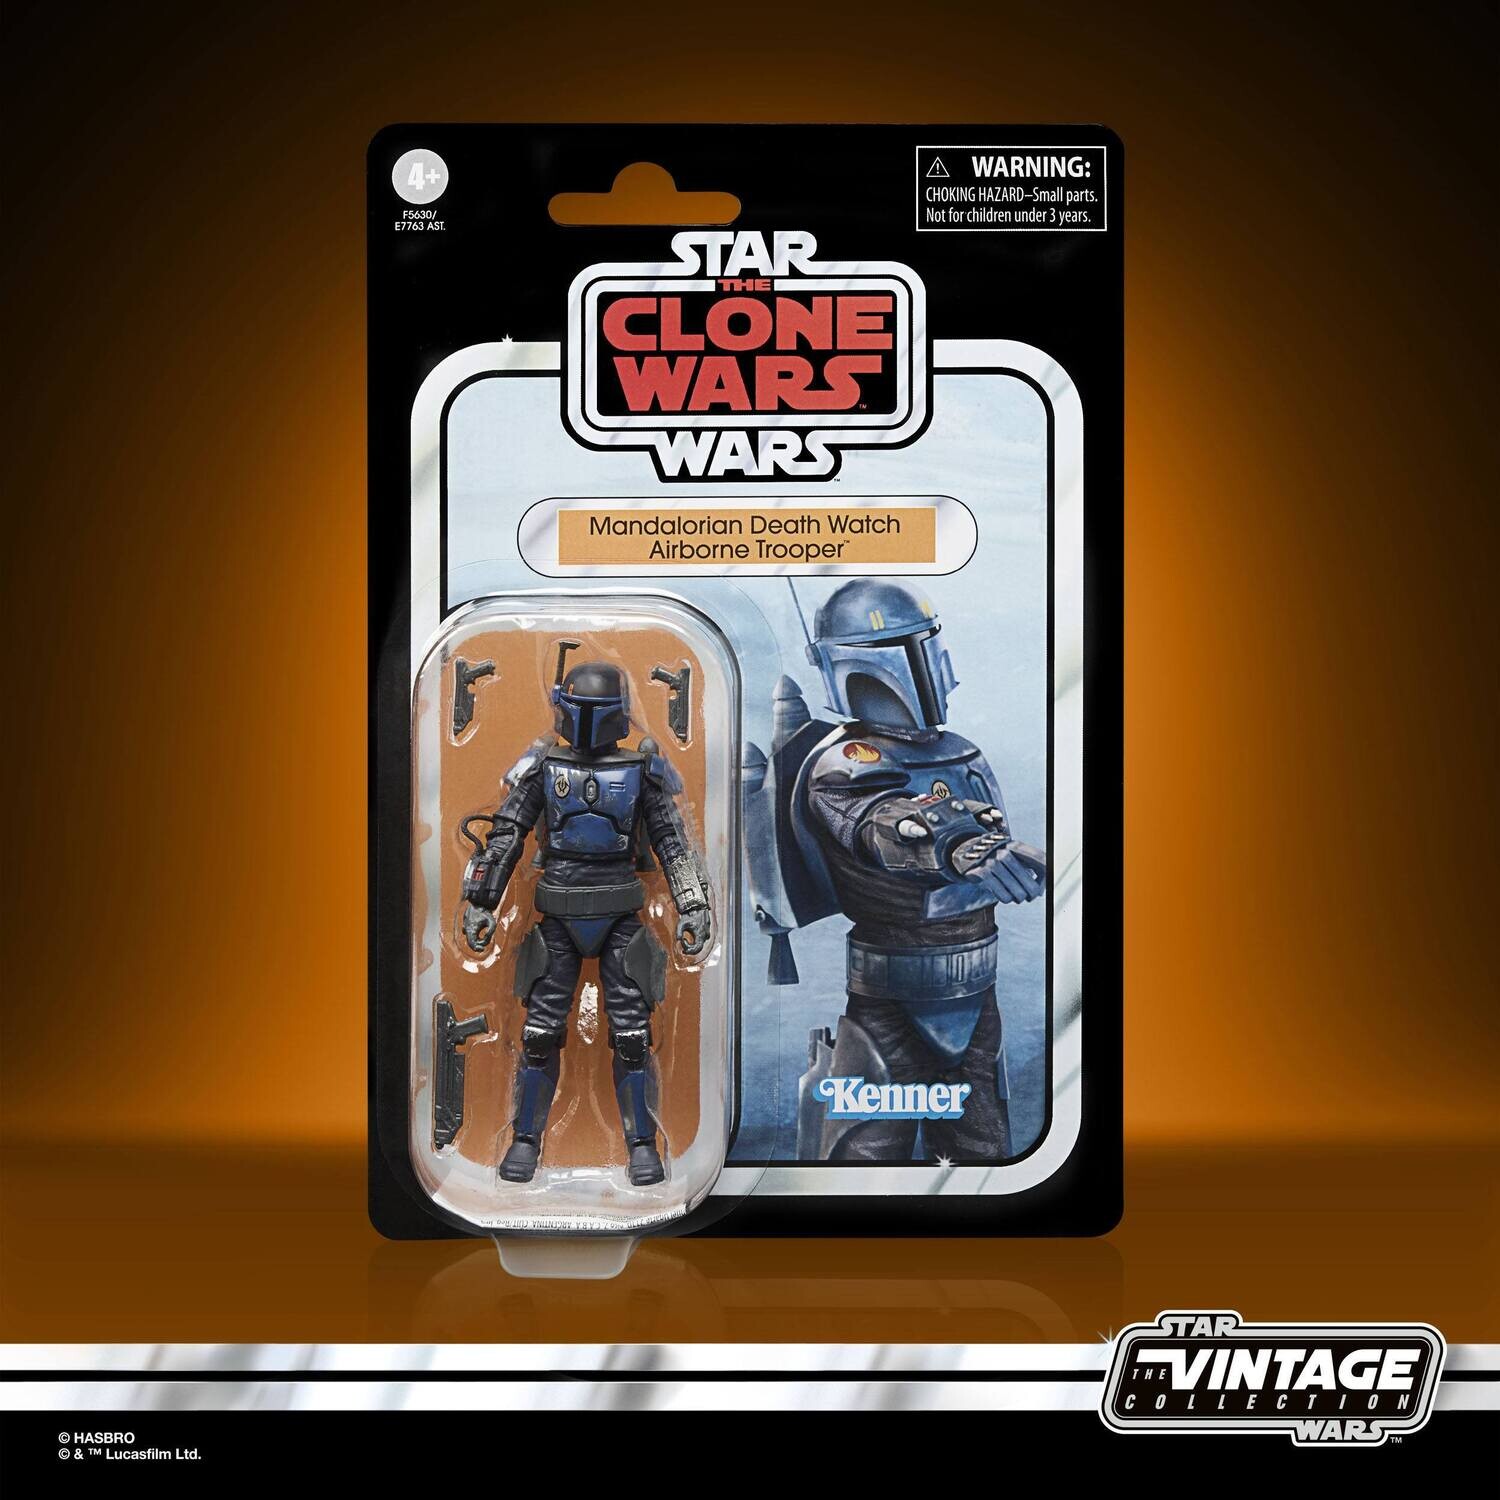 Star Wars The Vintage Collection Mandalorian Death Watch Airborne Trooper set of 4 (71.99)